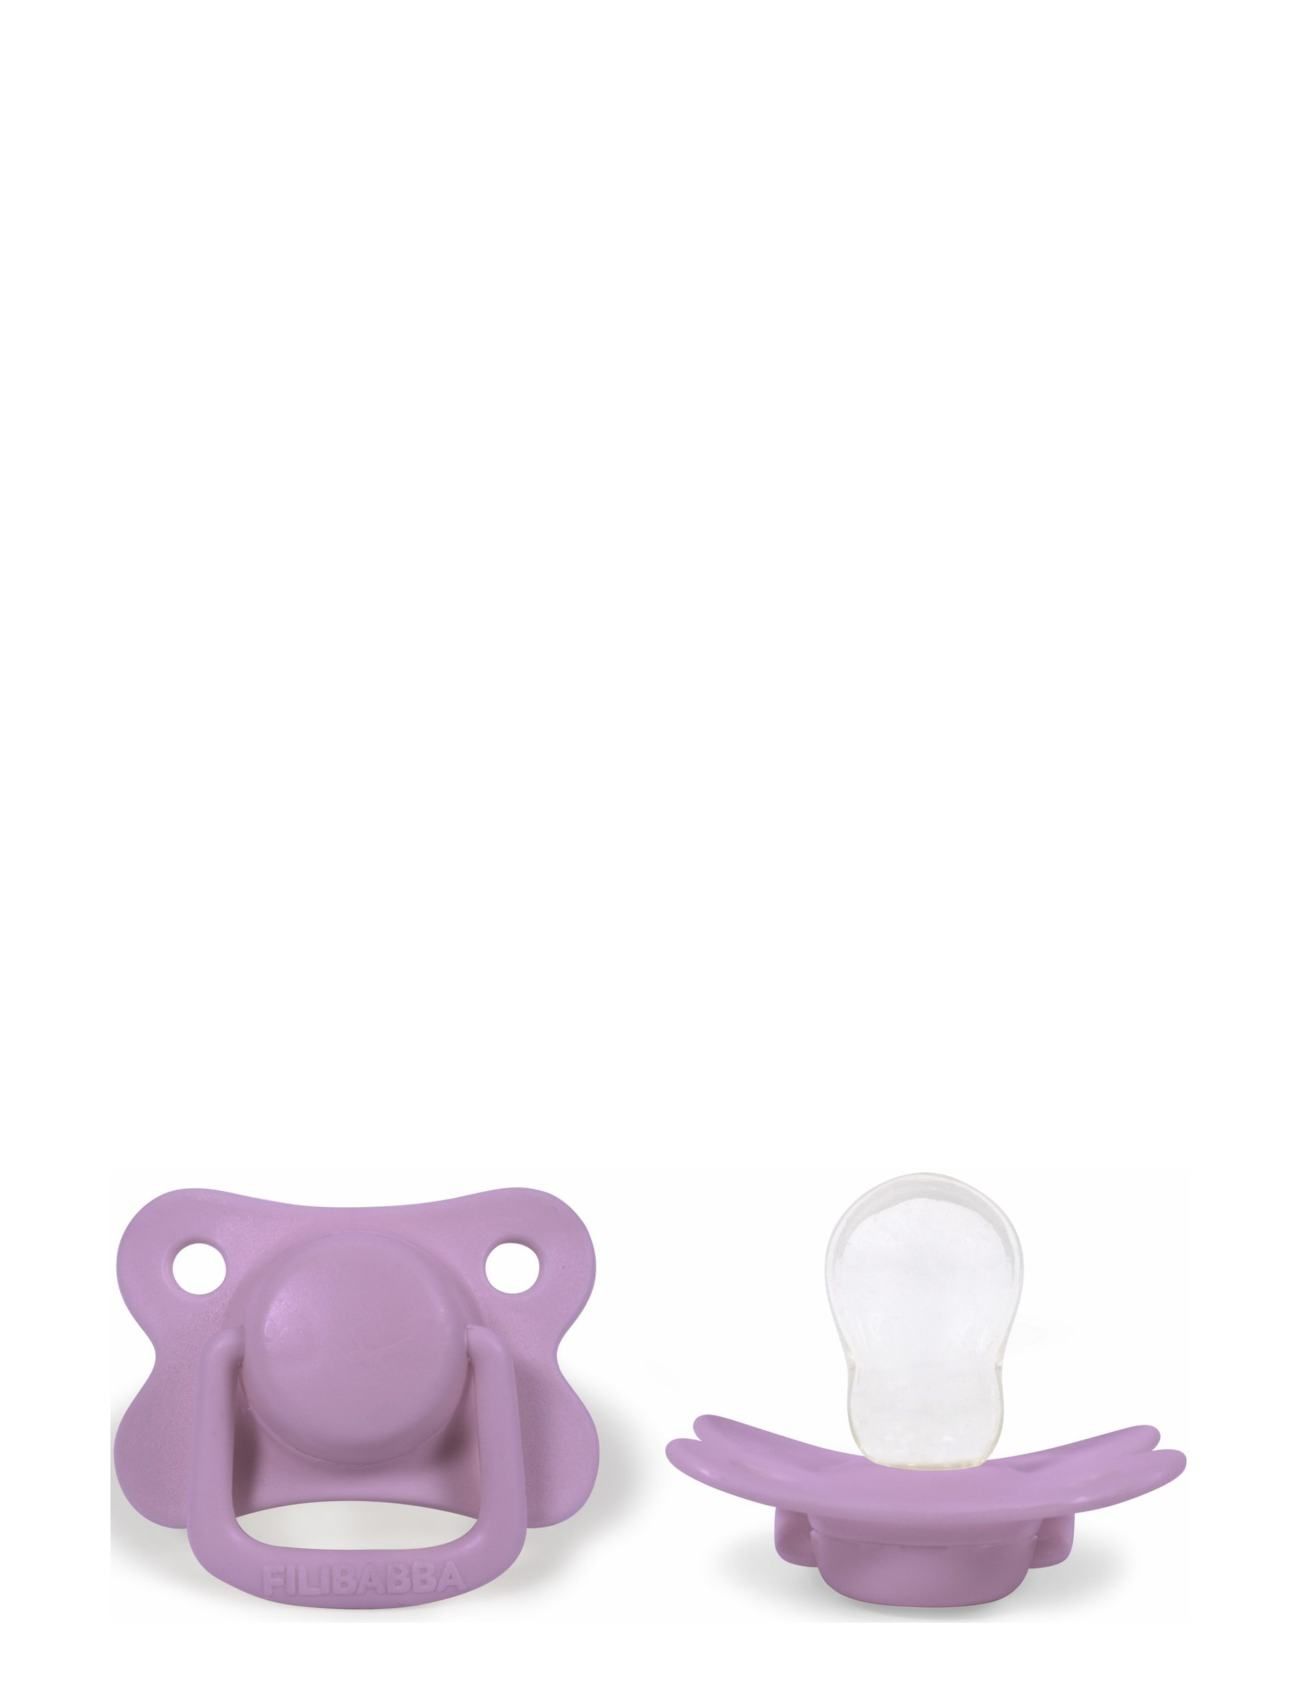 Filibabba 2-Pack Pacifiers - Light Lavender +6 Months Baby & Maternity Pacifiers Lilla Filibabba